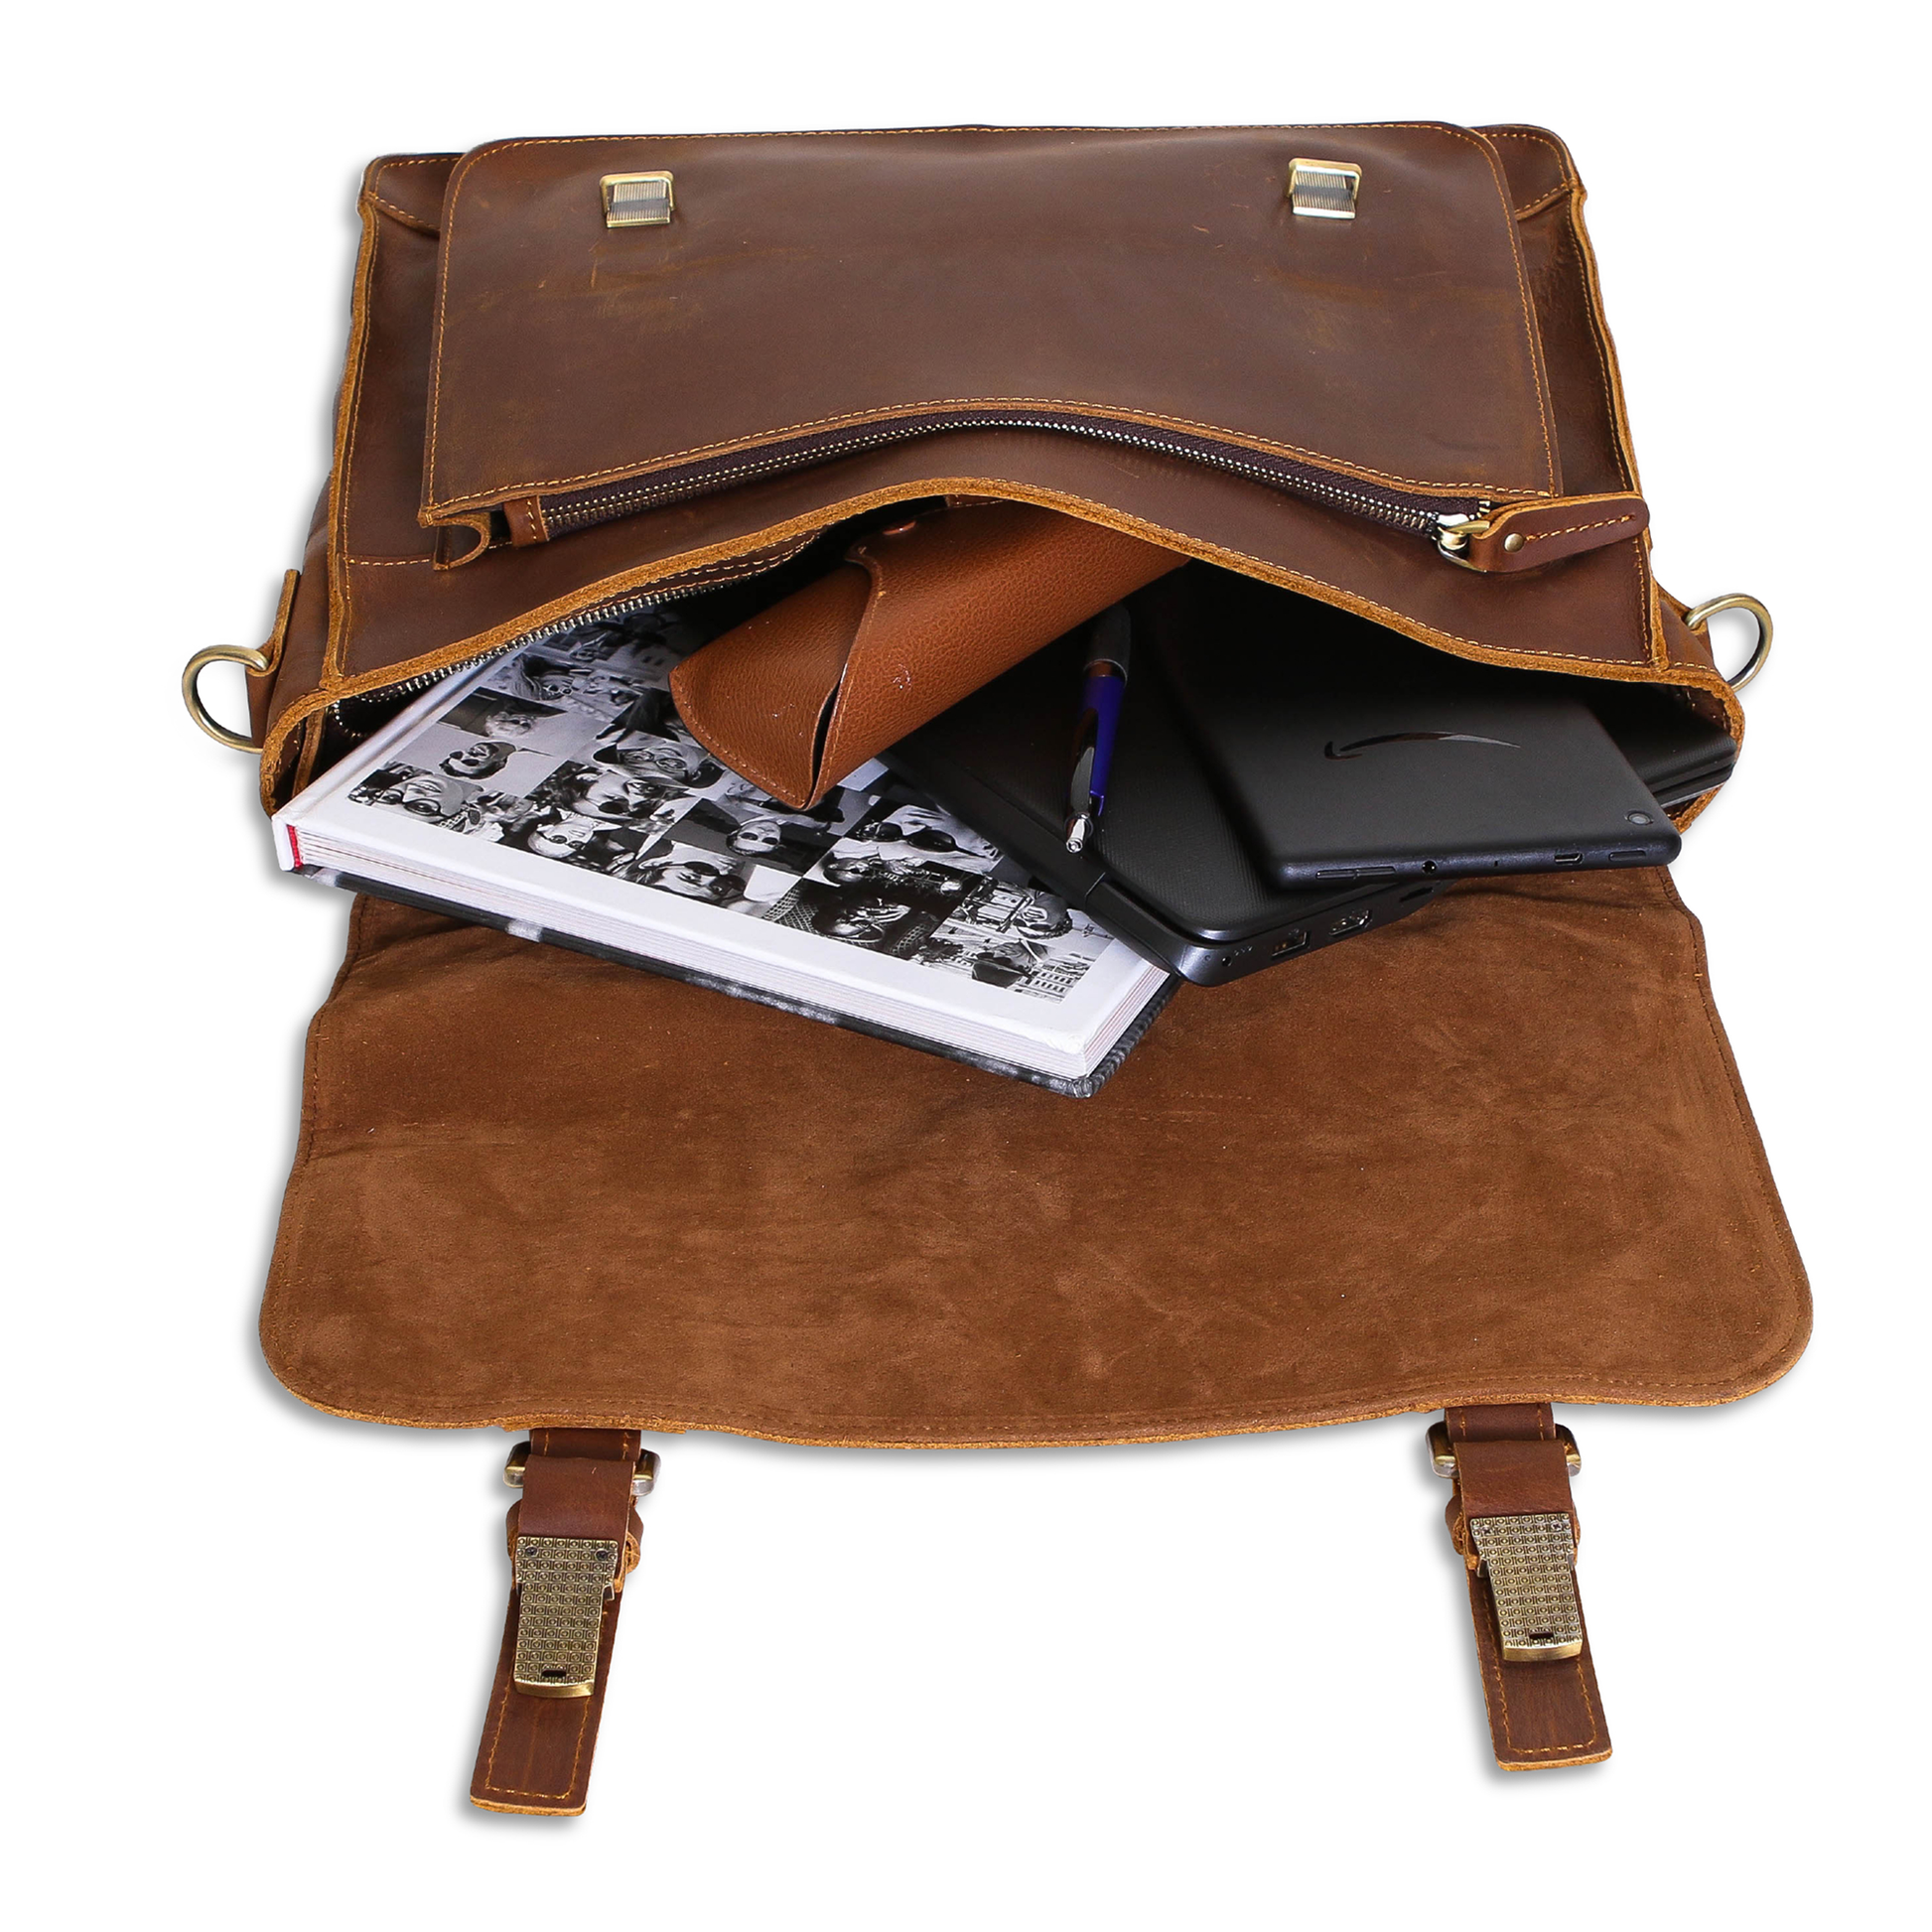 Text us to learn more !, leather, messenger bag